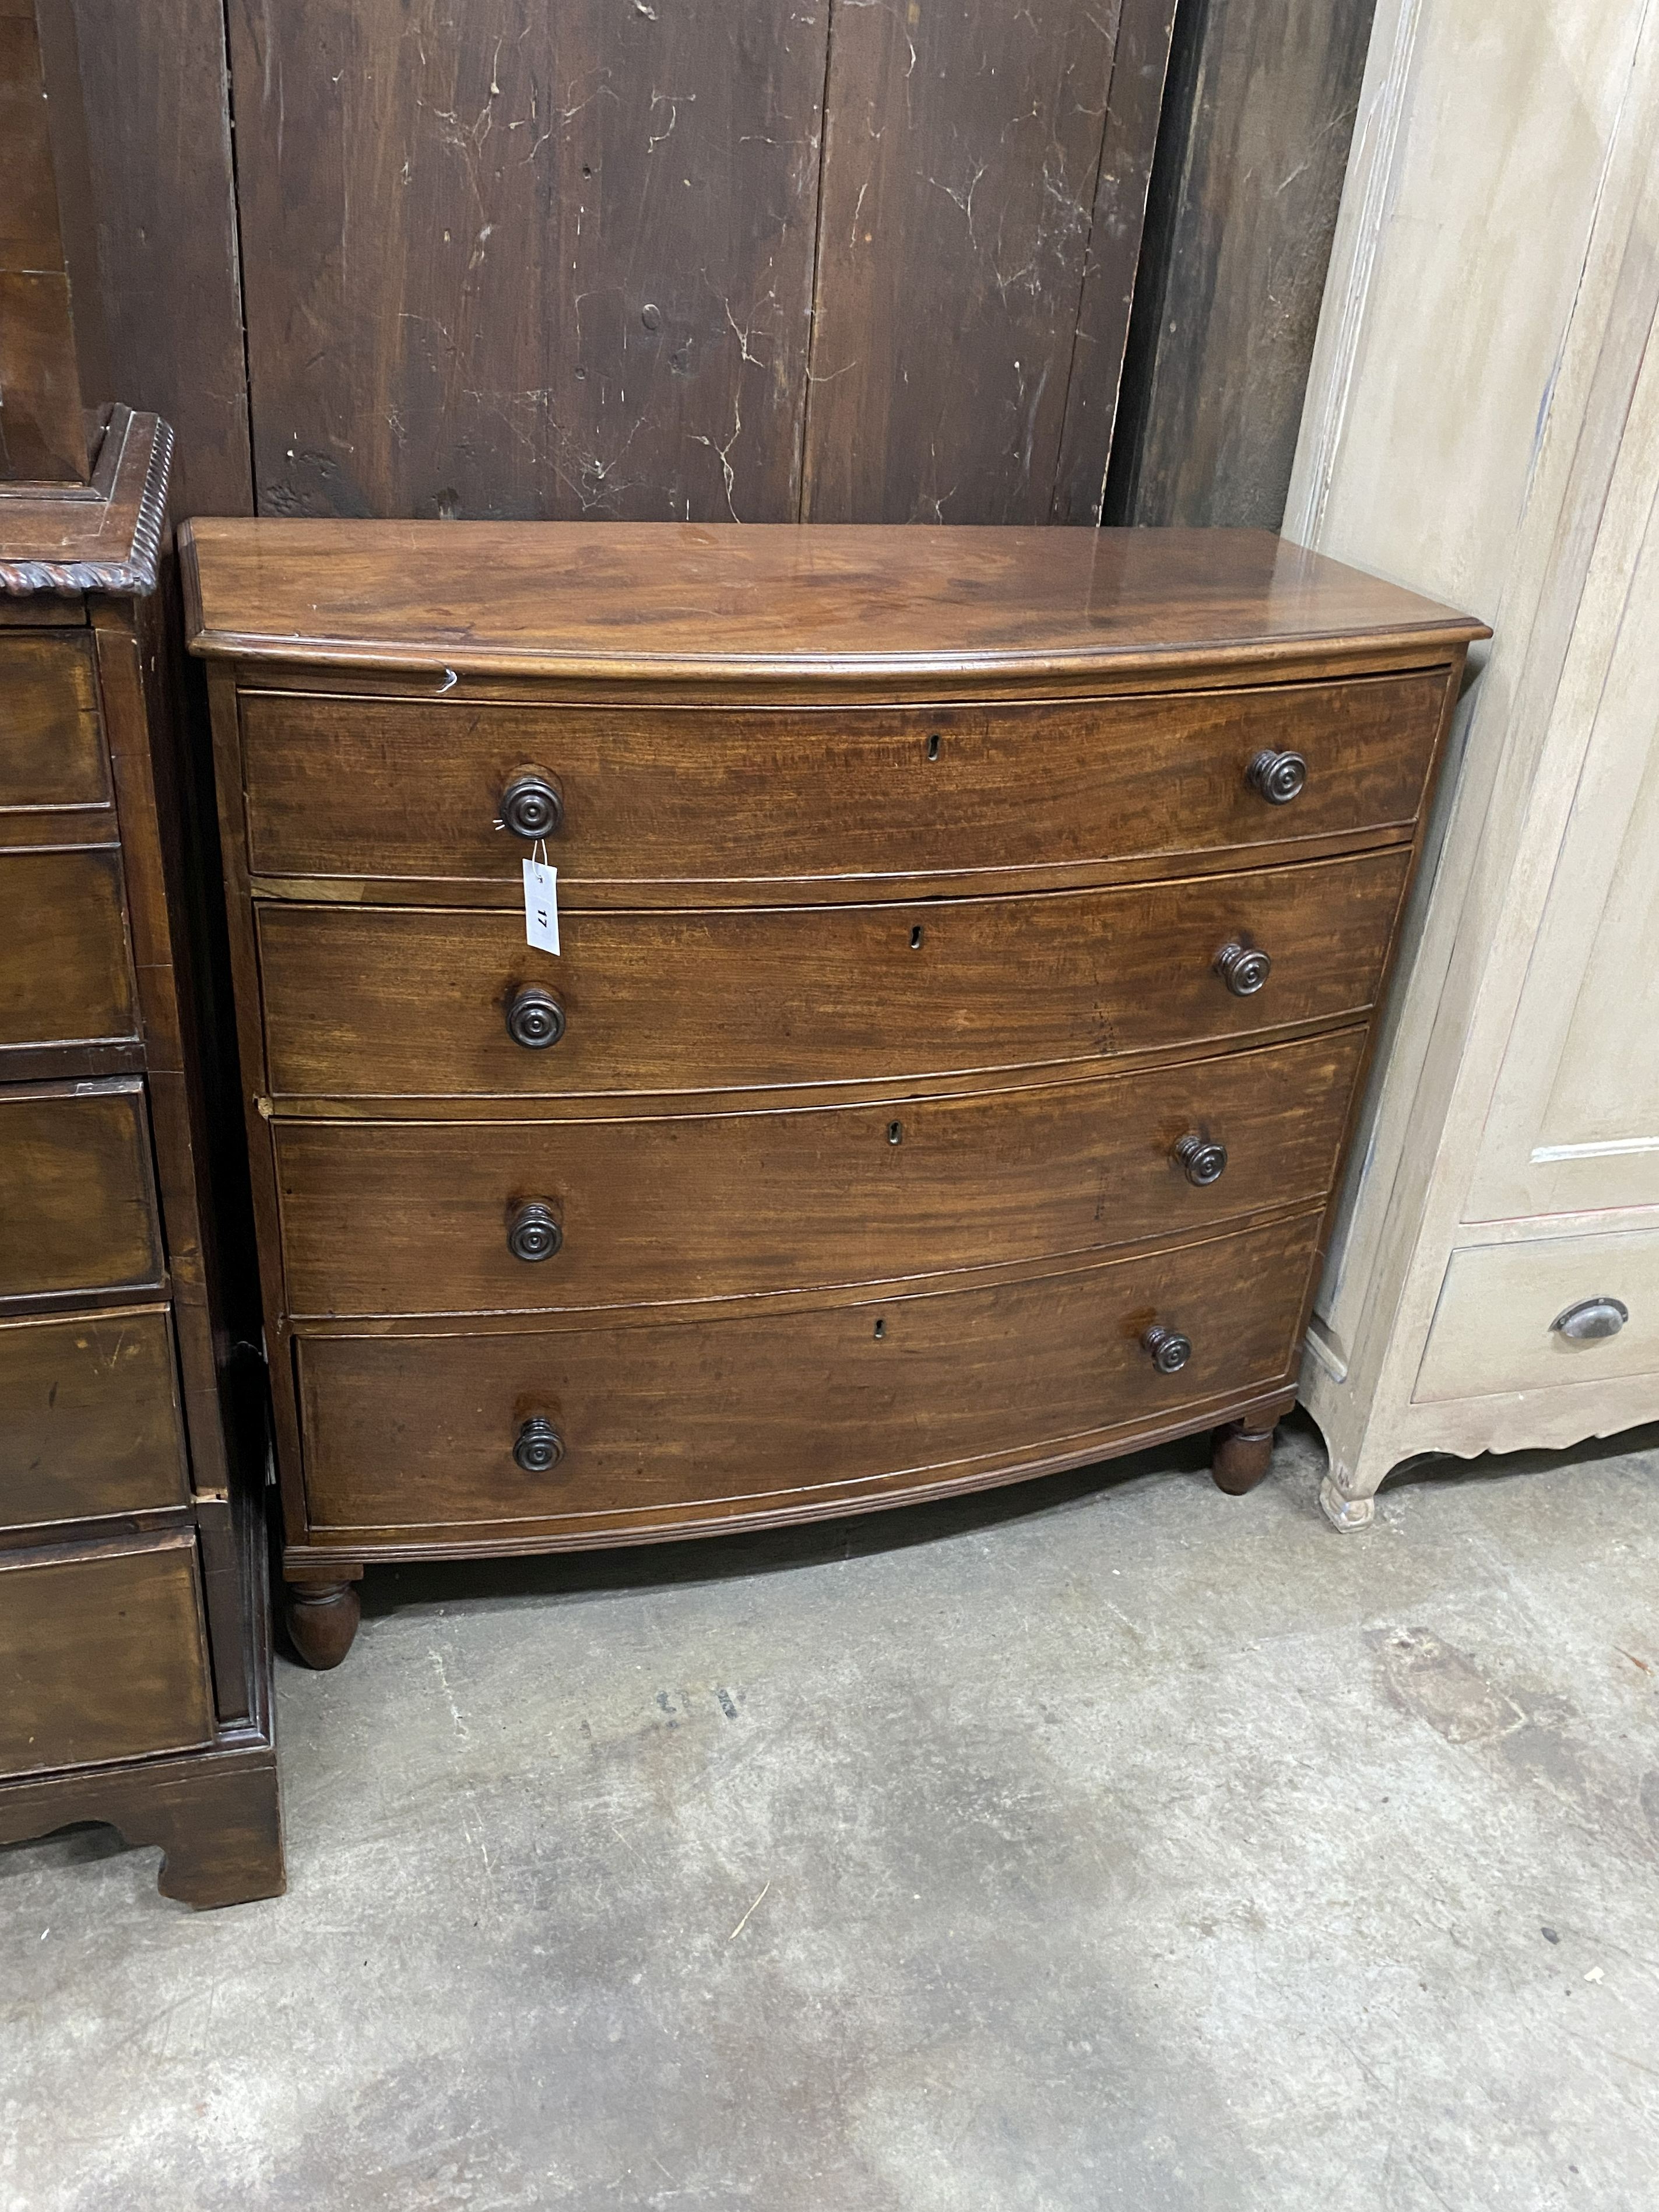 An early 19th century mahogany bowfront chest of drawers, width 119cm, depth 45cm, height 101cm